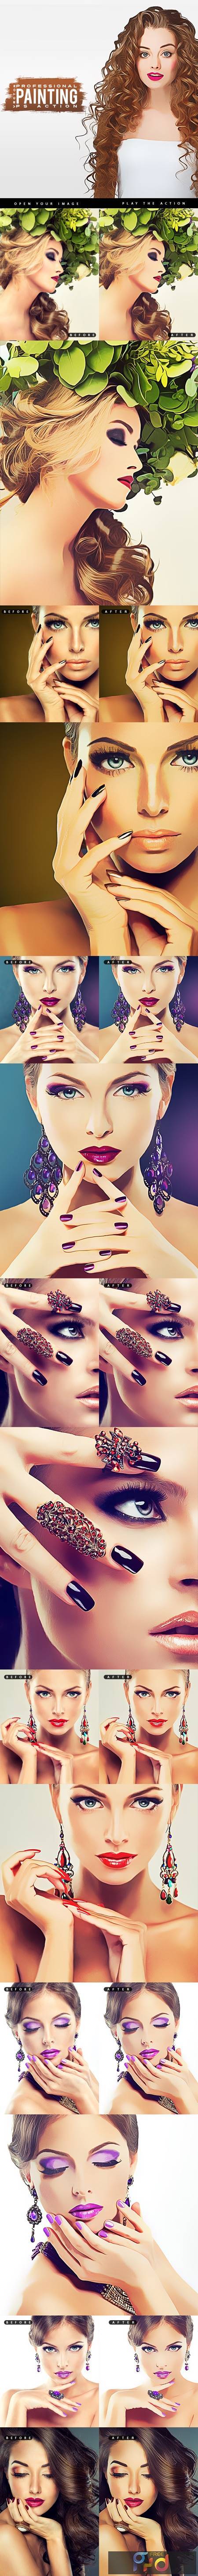 Pro Vector Painting - Photoshop Action 28835214 1